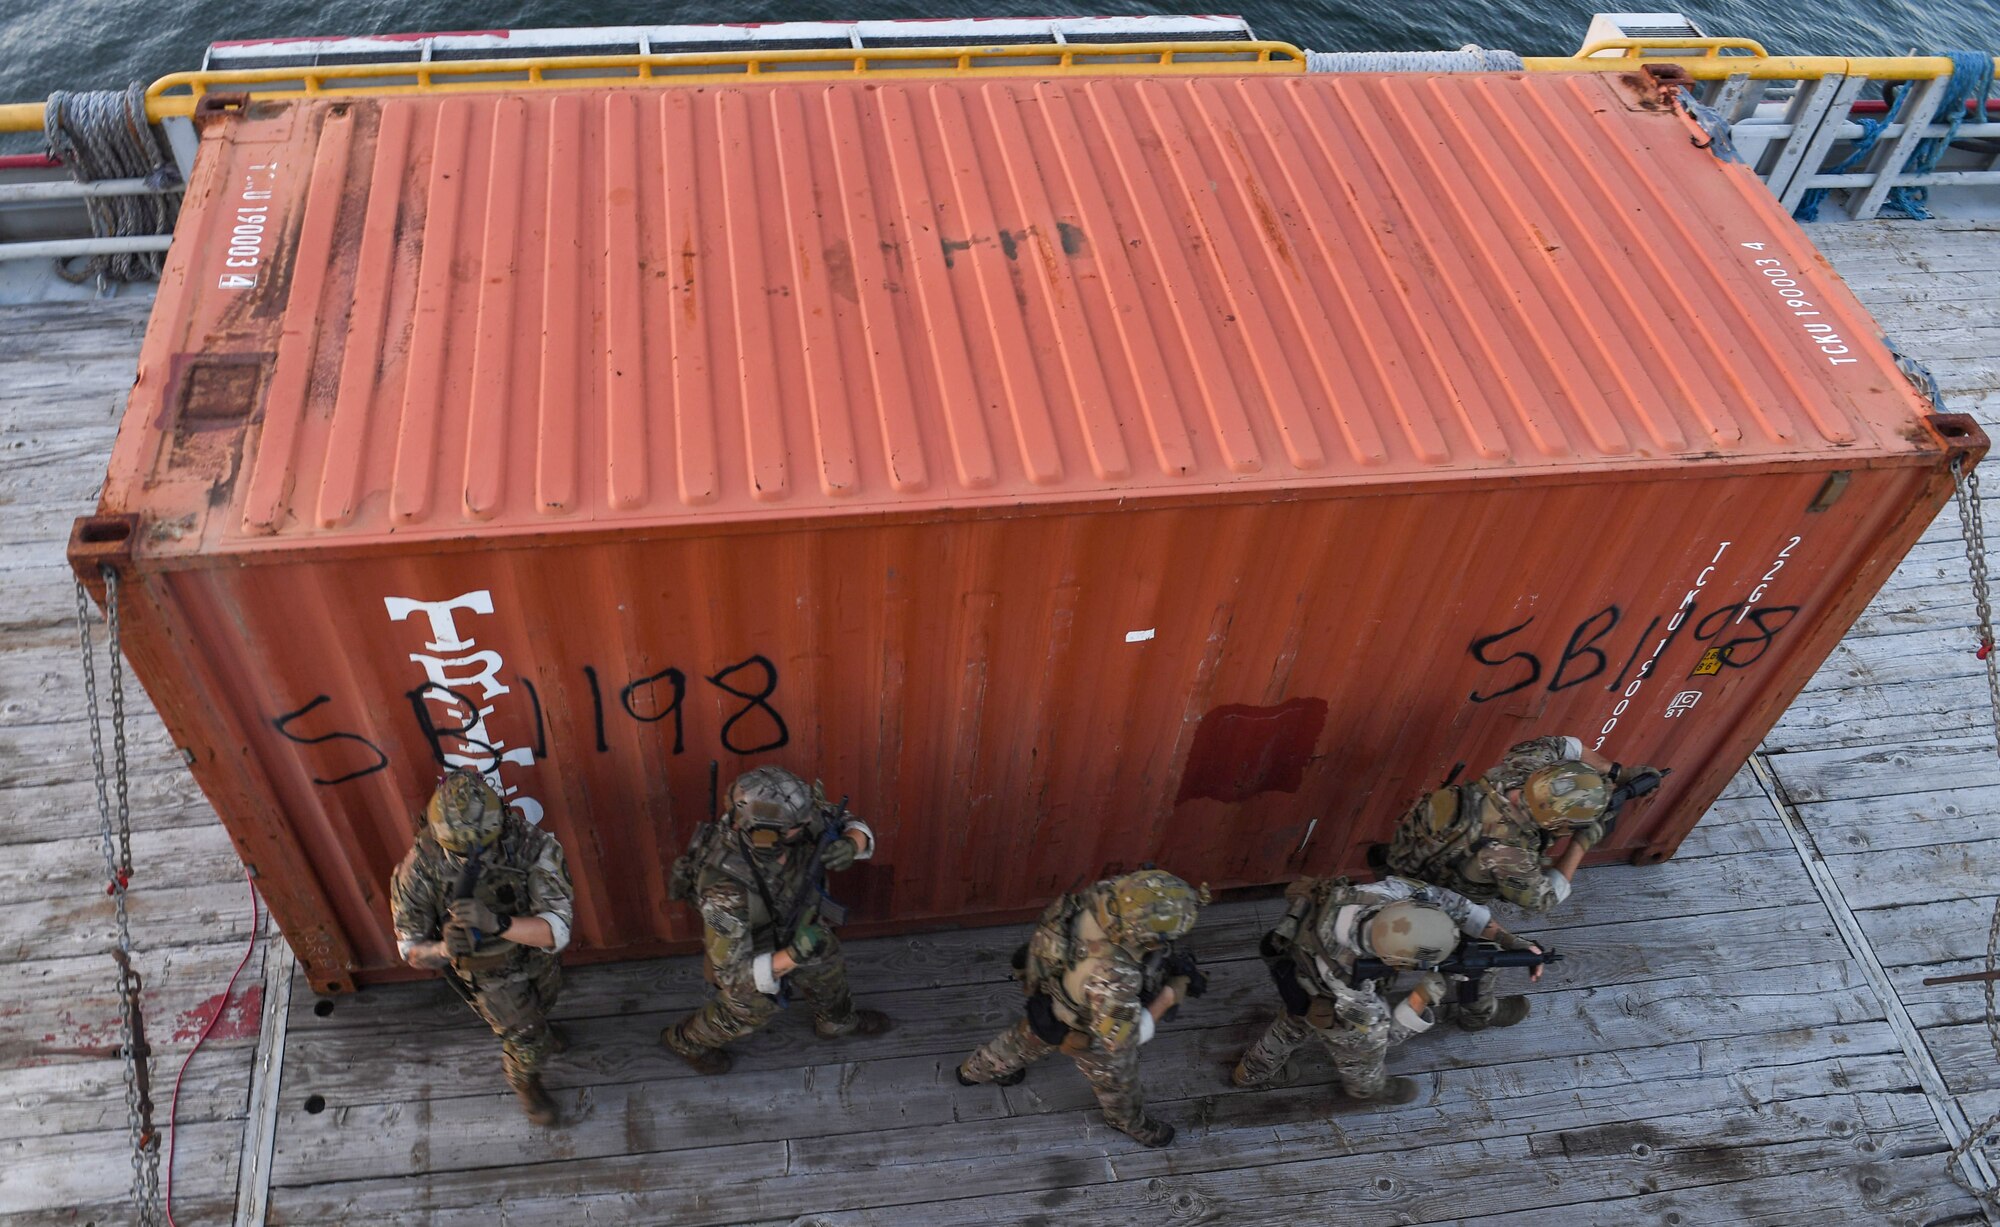 U.S. Coast Guardsmen from the Maritime Security Response Team East simulate interdicting a jammer on a vessel in support of Advanced Battle Management System Onramp 2 in the Gulf of Mexico, Sept. 2, 2020. ABMS is an interconnected battle network - the digital architecture or foundation - which collects, processes and shares data relevant to warfighters. In order to achieve all-domain superiority, it requires that individual military activities not simply be de-conflicted, but rather integrated – activities in one domain must enhance the effectiveness of those in another domain. (U.S. Air Force photo by Staff Sgt. Haley Phillips)